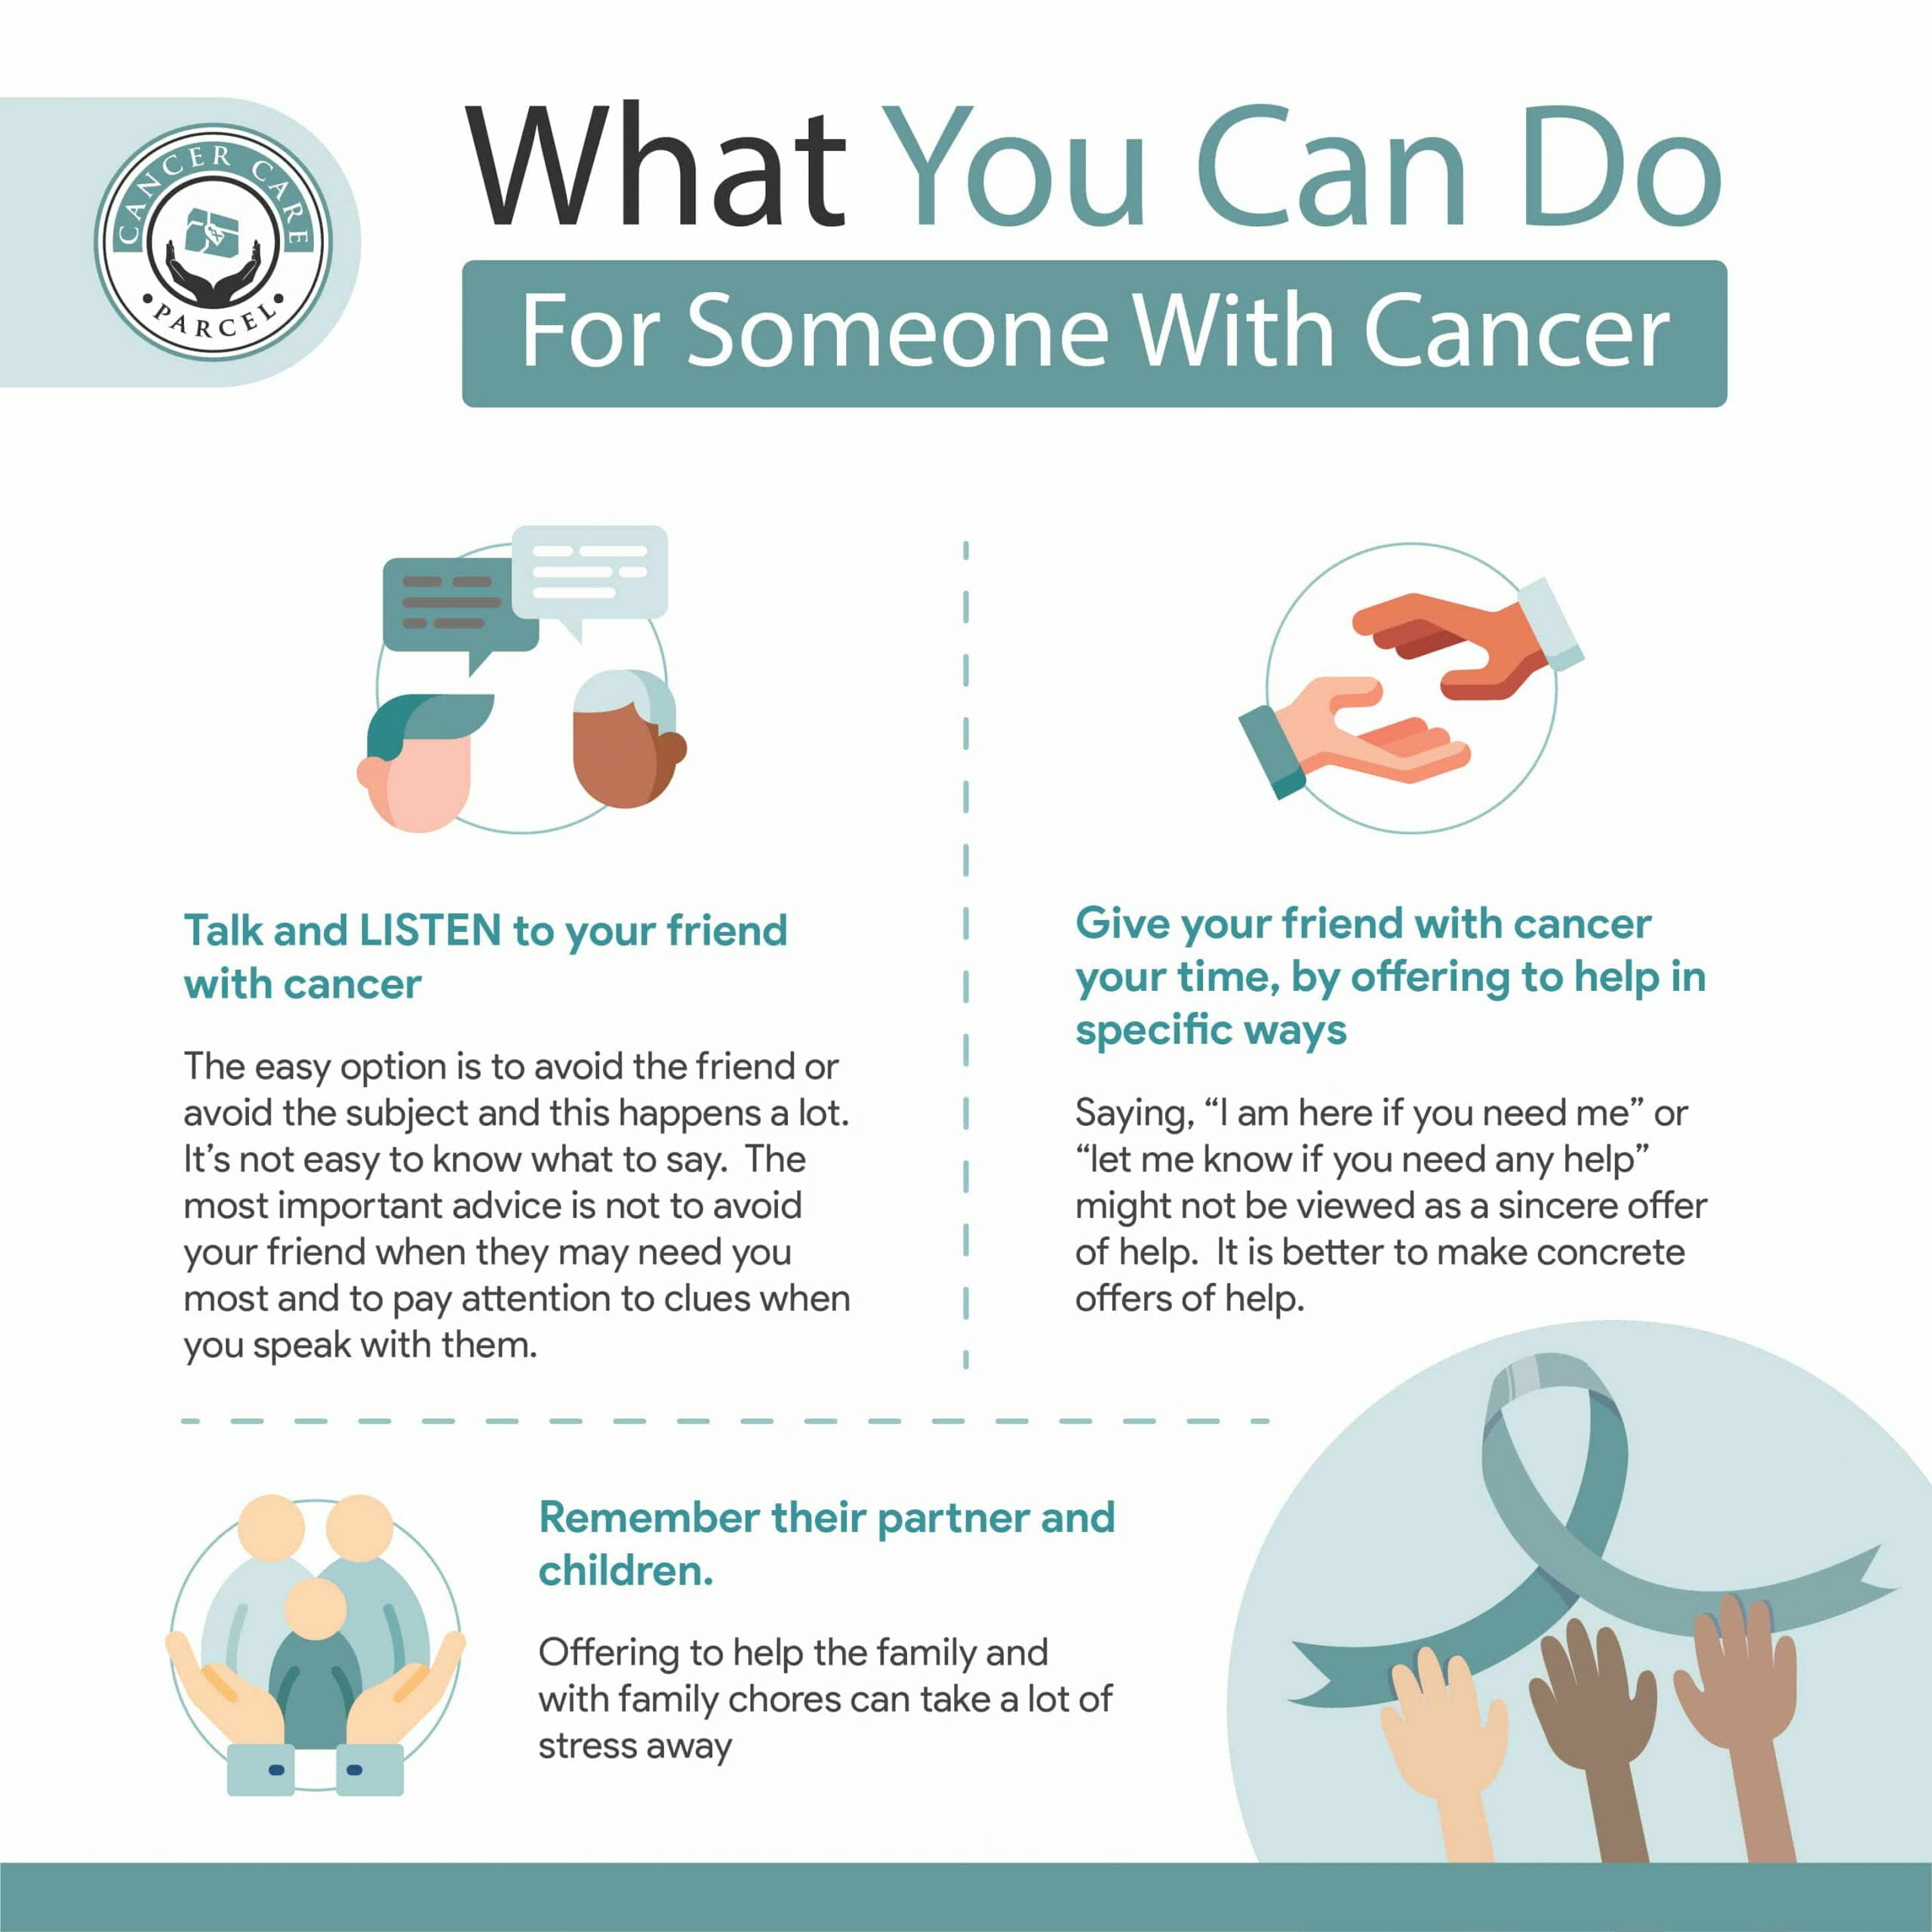 What You Can Do For Someone With Cancer